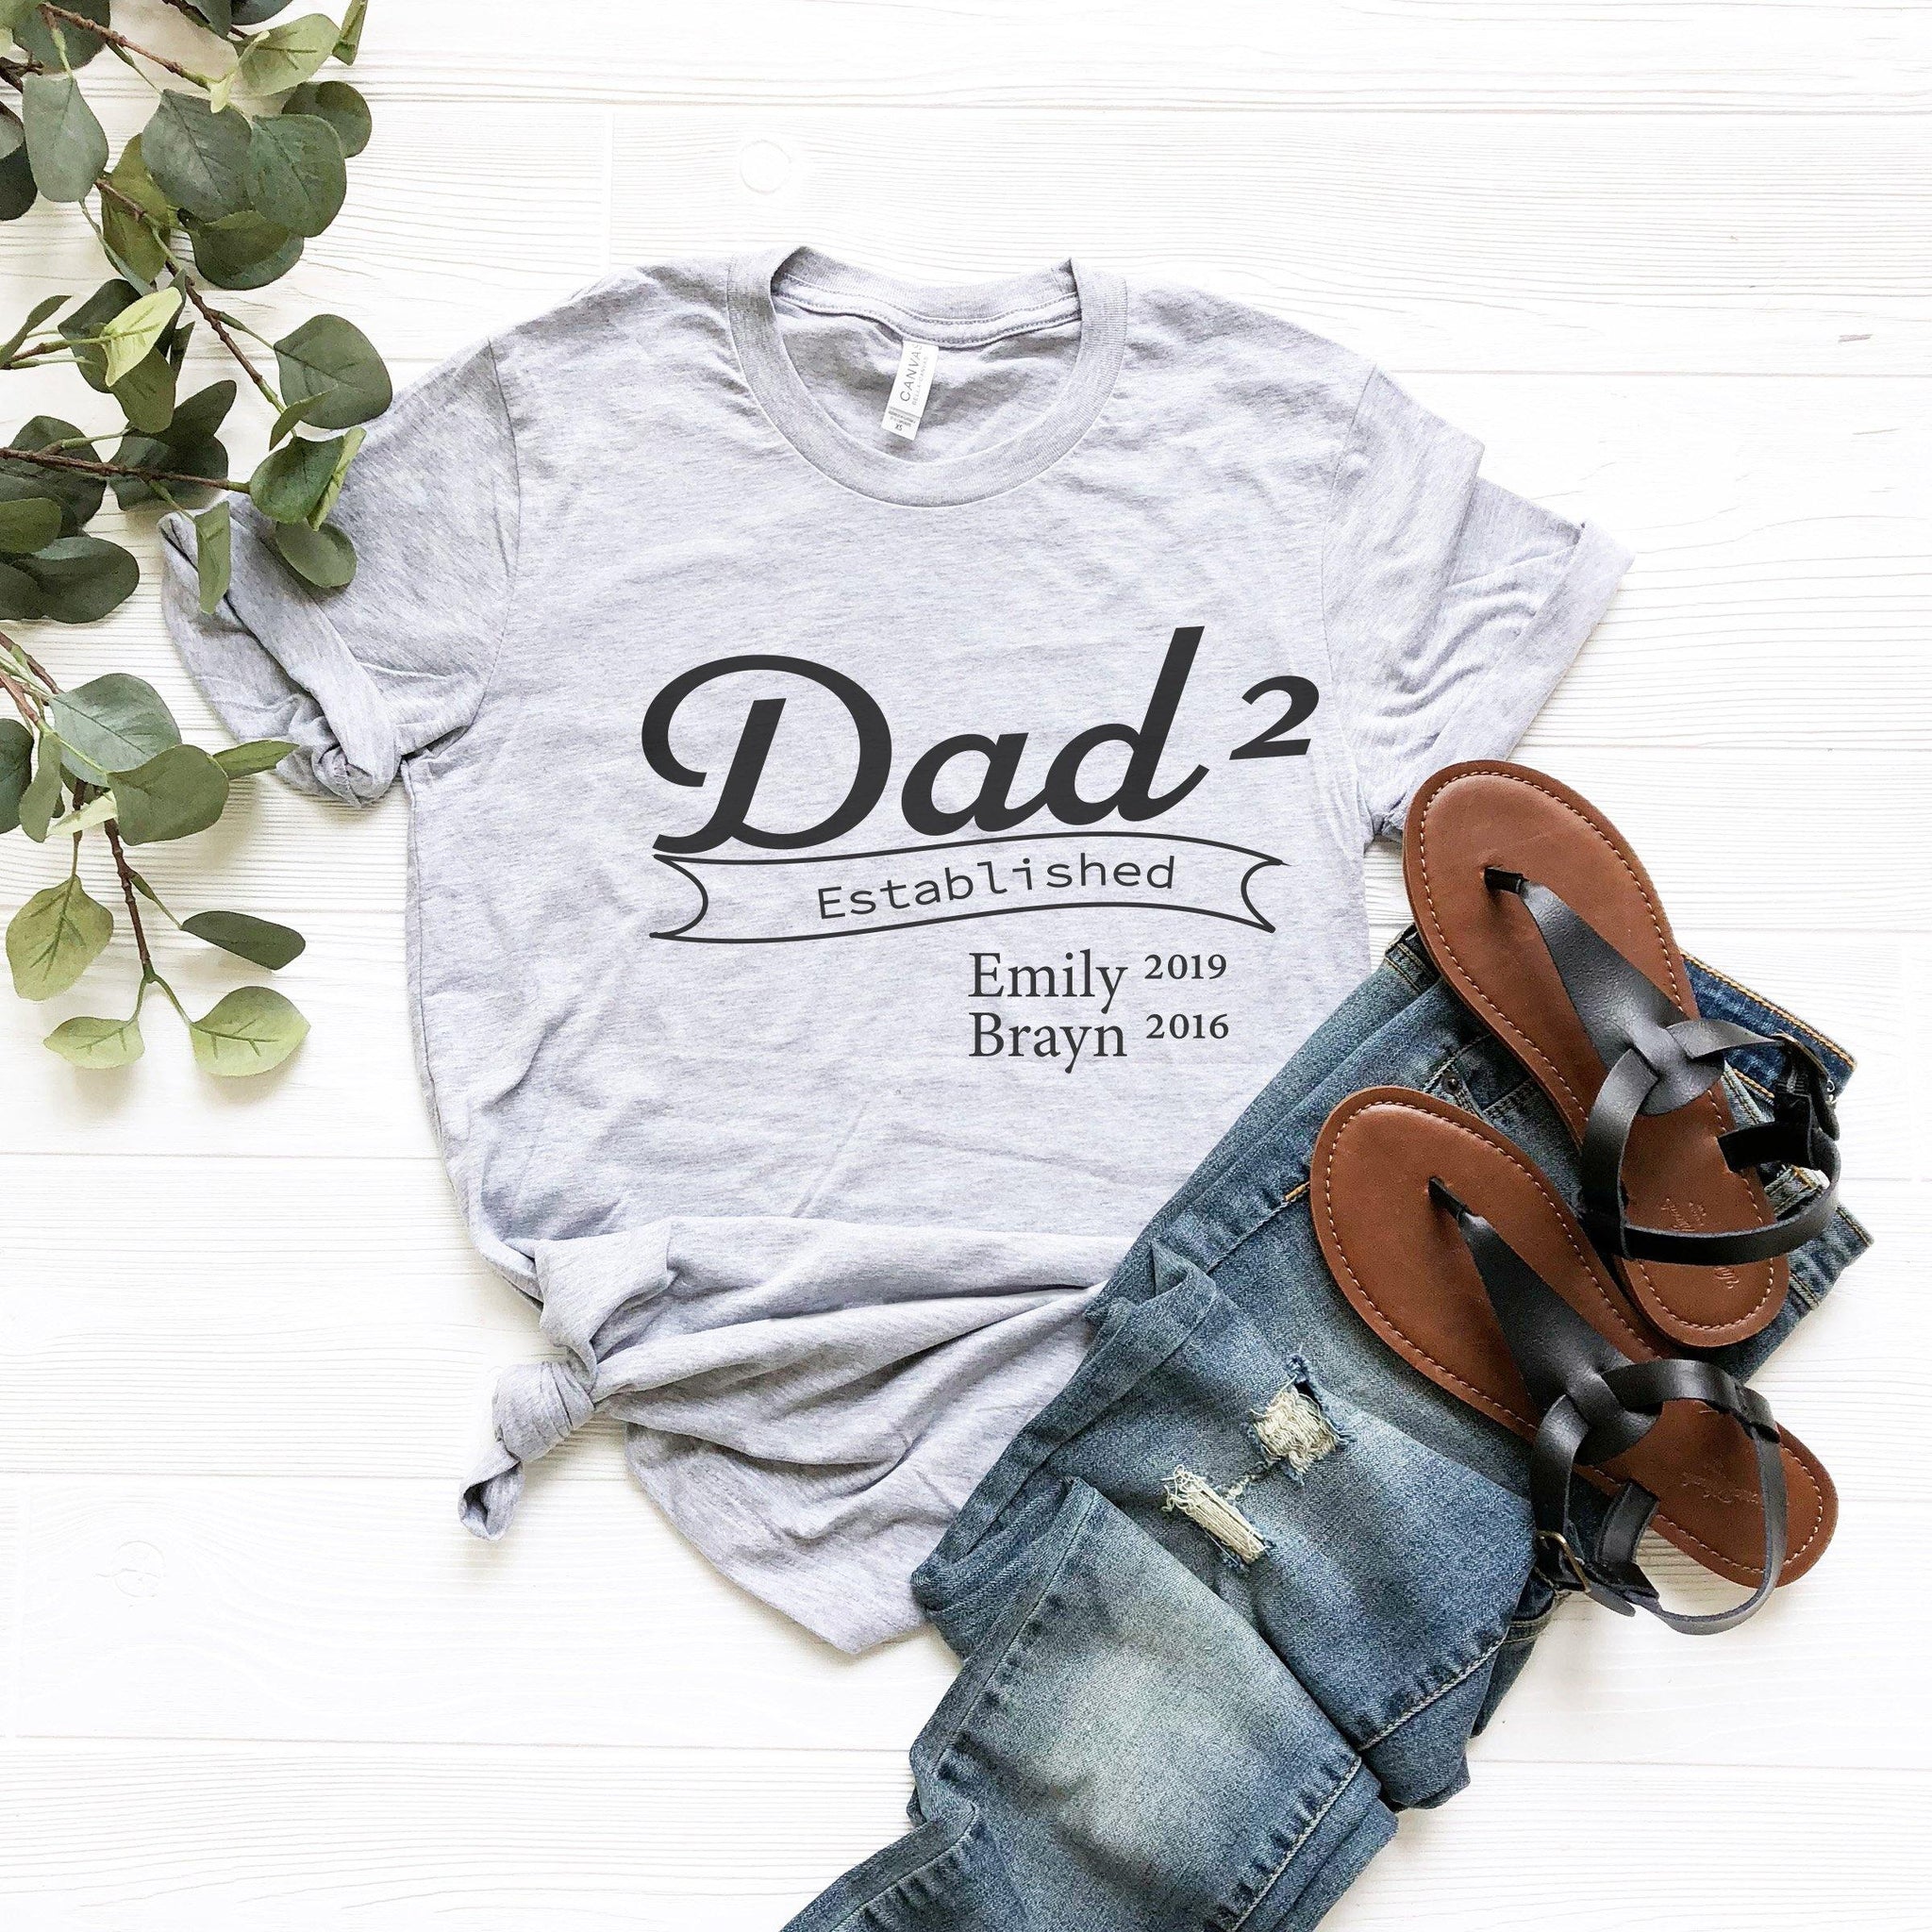 Dad Established Shirt with Custom Names, Dad gift shirts, Dad shirts from daughter, Funny Shirt for dad, Dad Birthday,Customizable dad shirt - Fastdeliverytees.com